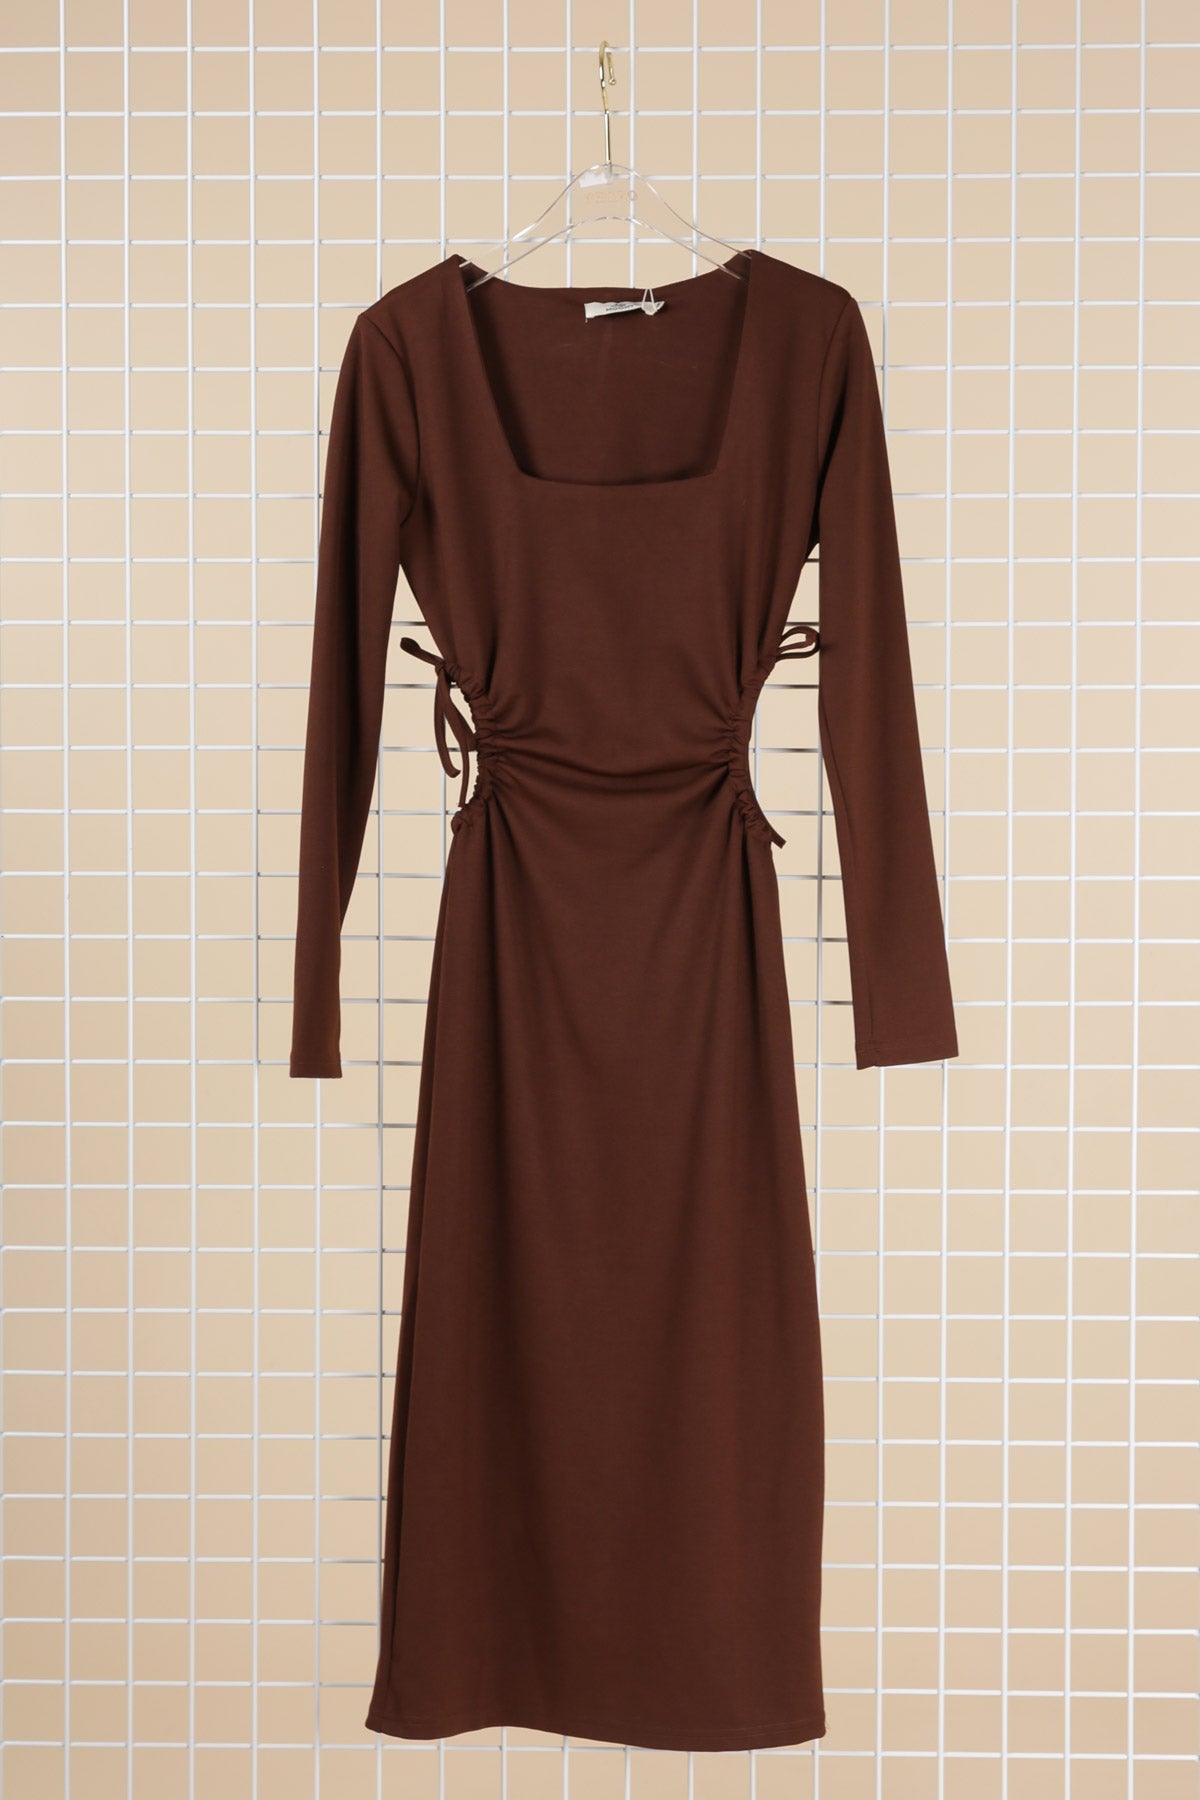 Chocolate Brown Side Cut-Out Dress - NIXII Clothing